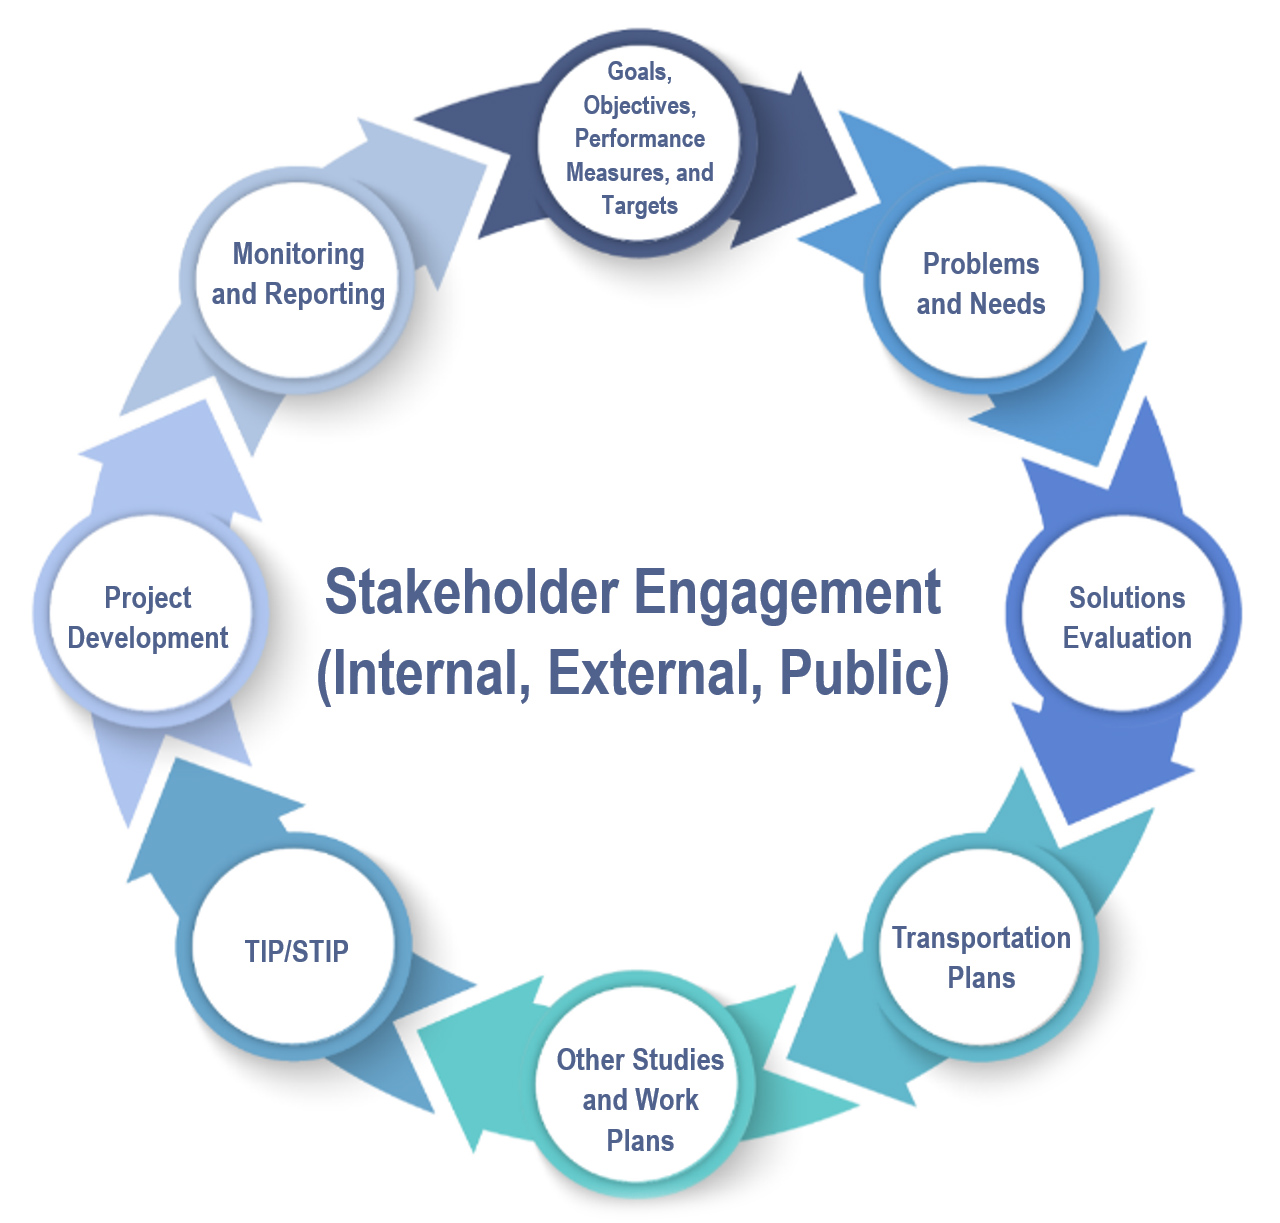 Circular graphic depicting the transportation planning process. Steps include:Goals, objectives, performance measures, and targets.Problems and needs.solutions evaluation.transportation plans.other studies and work plans.TIP/STIP.Project development.Monitoring and reporting.In the center of the circle- Stakeholder engagement (internal, external, public)